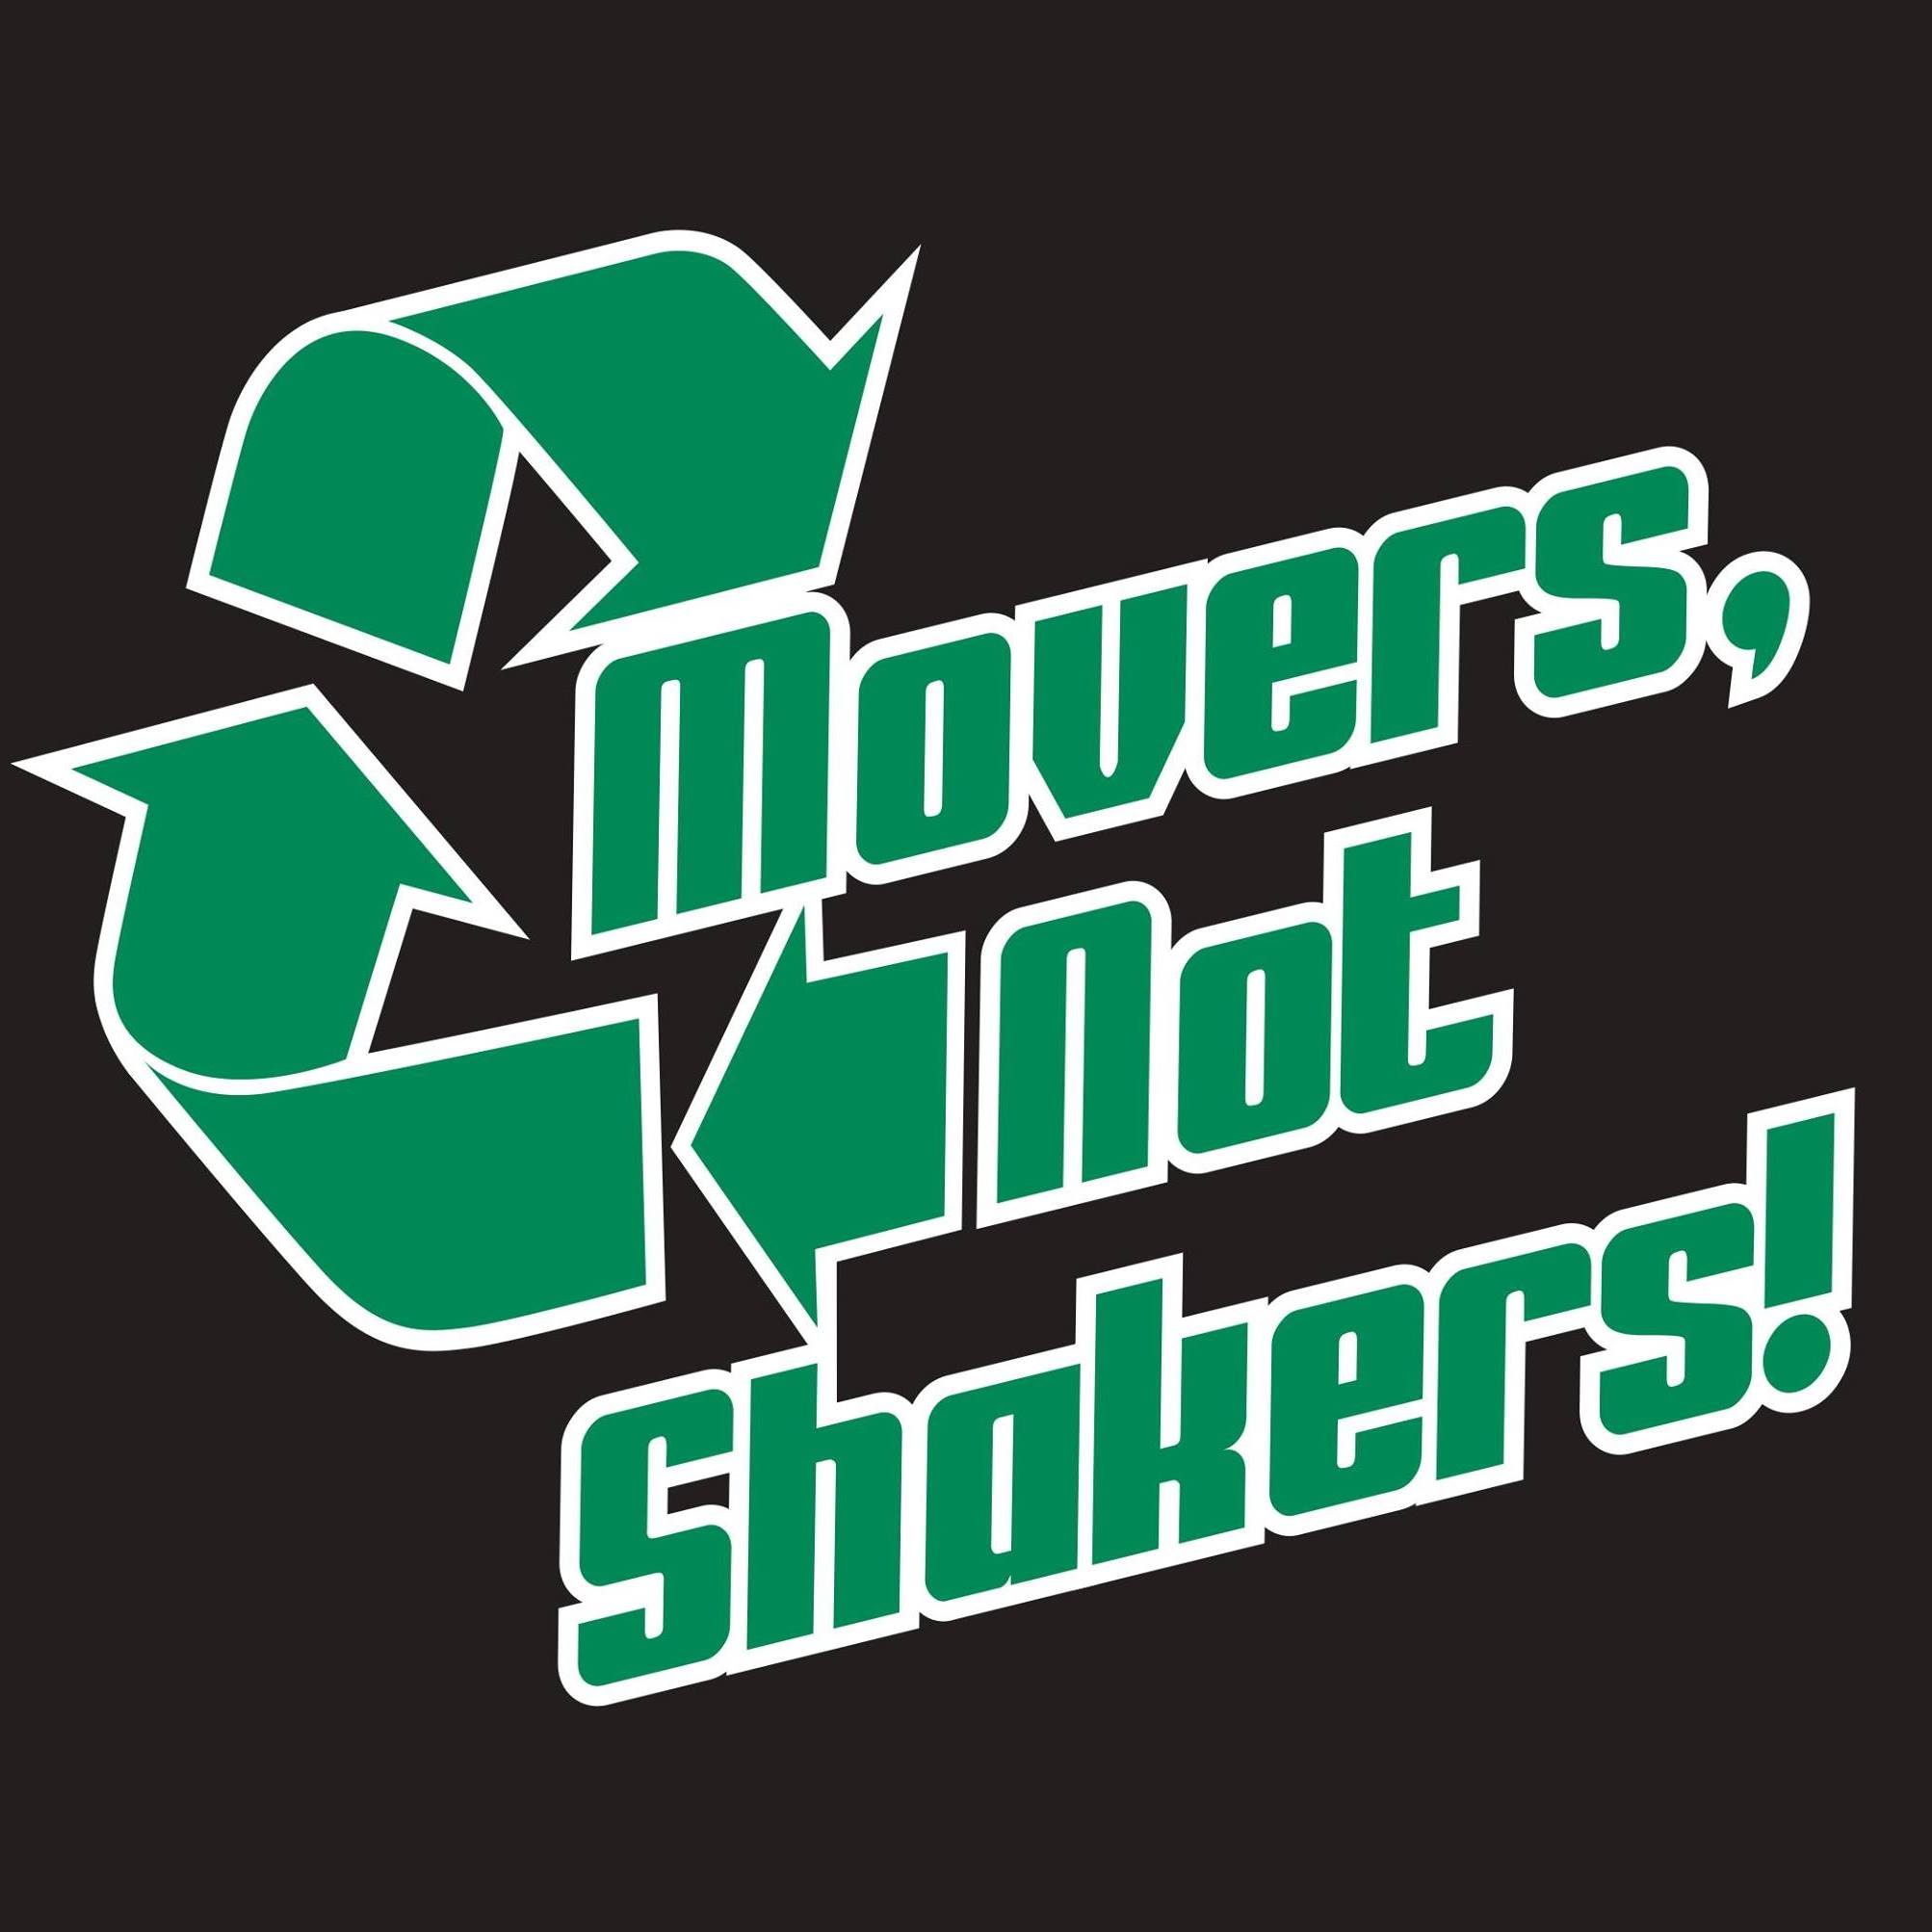 Company logo of Movers Not Shakers